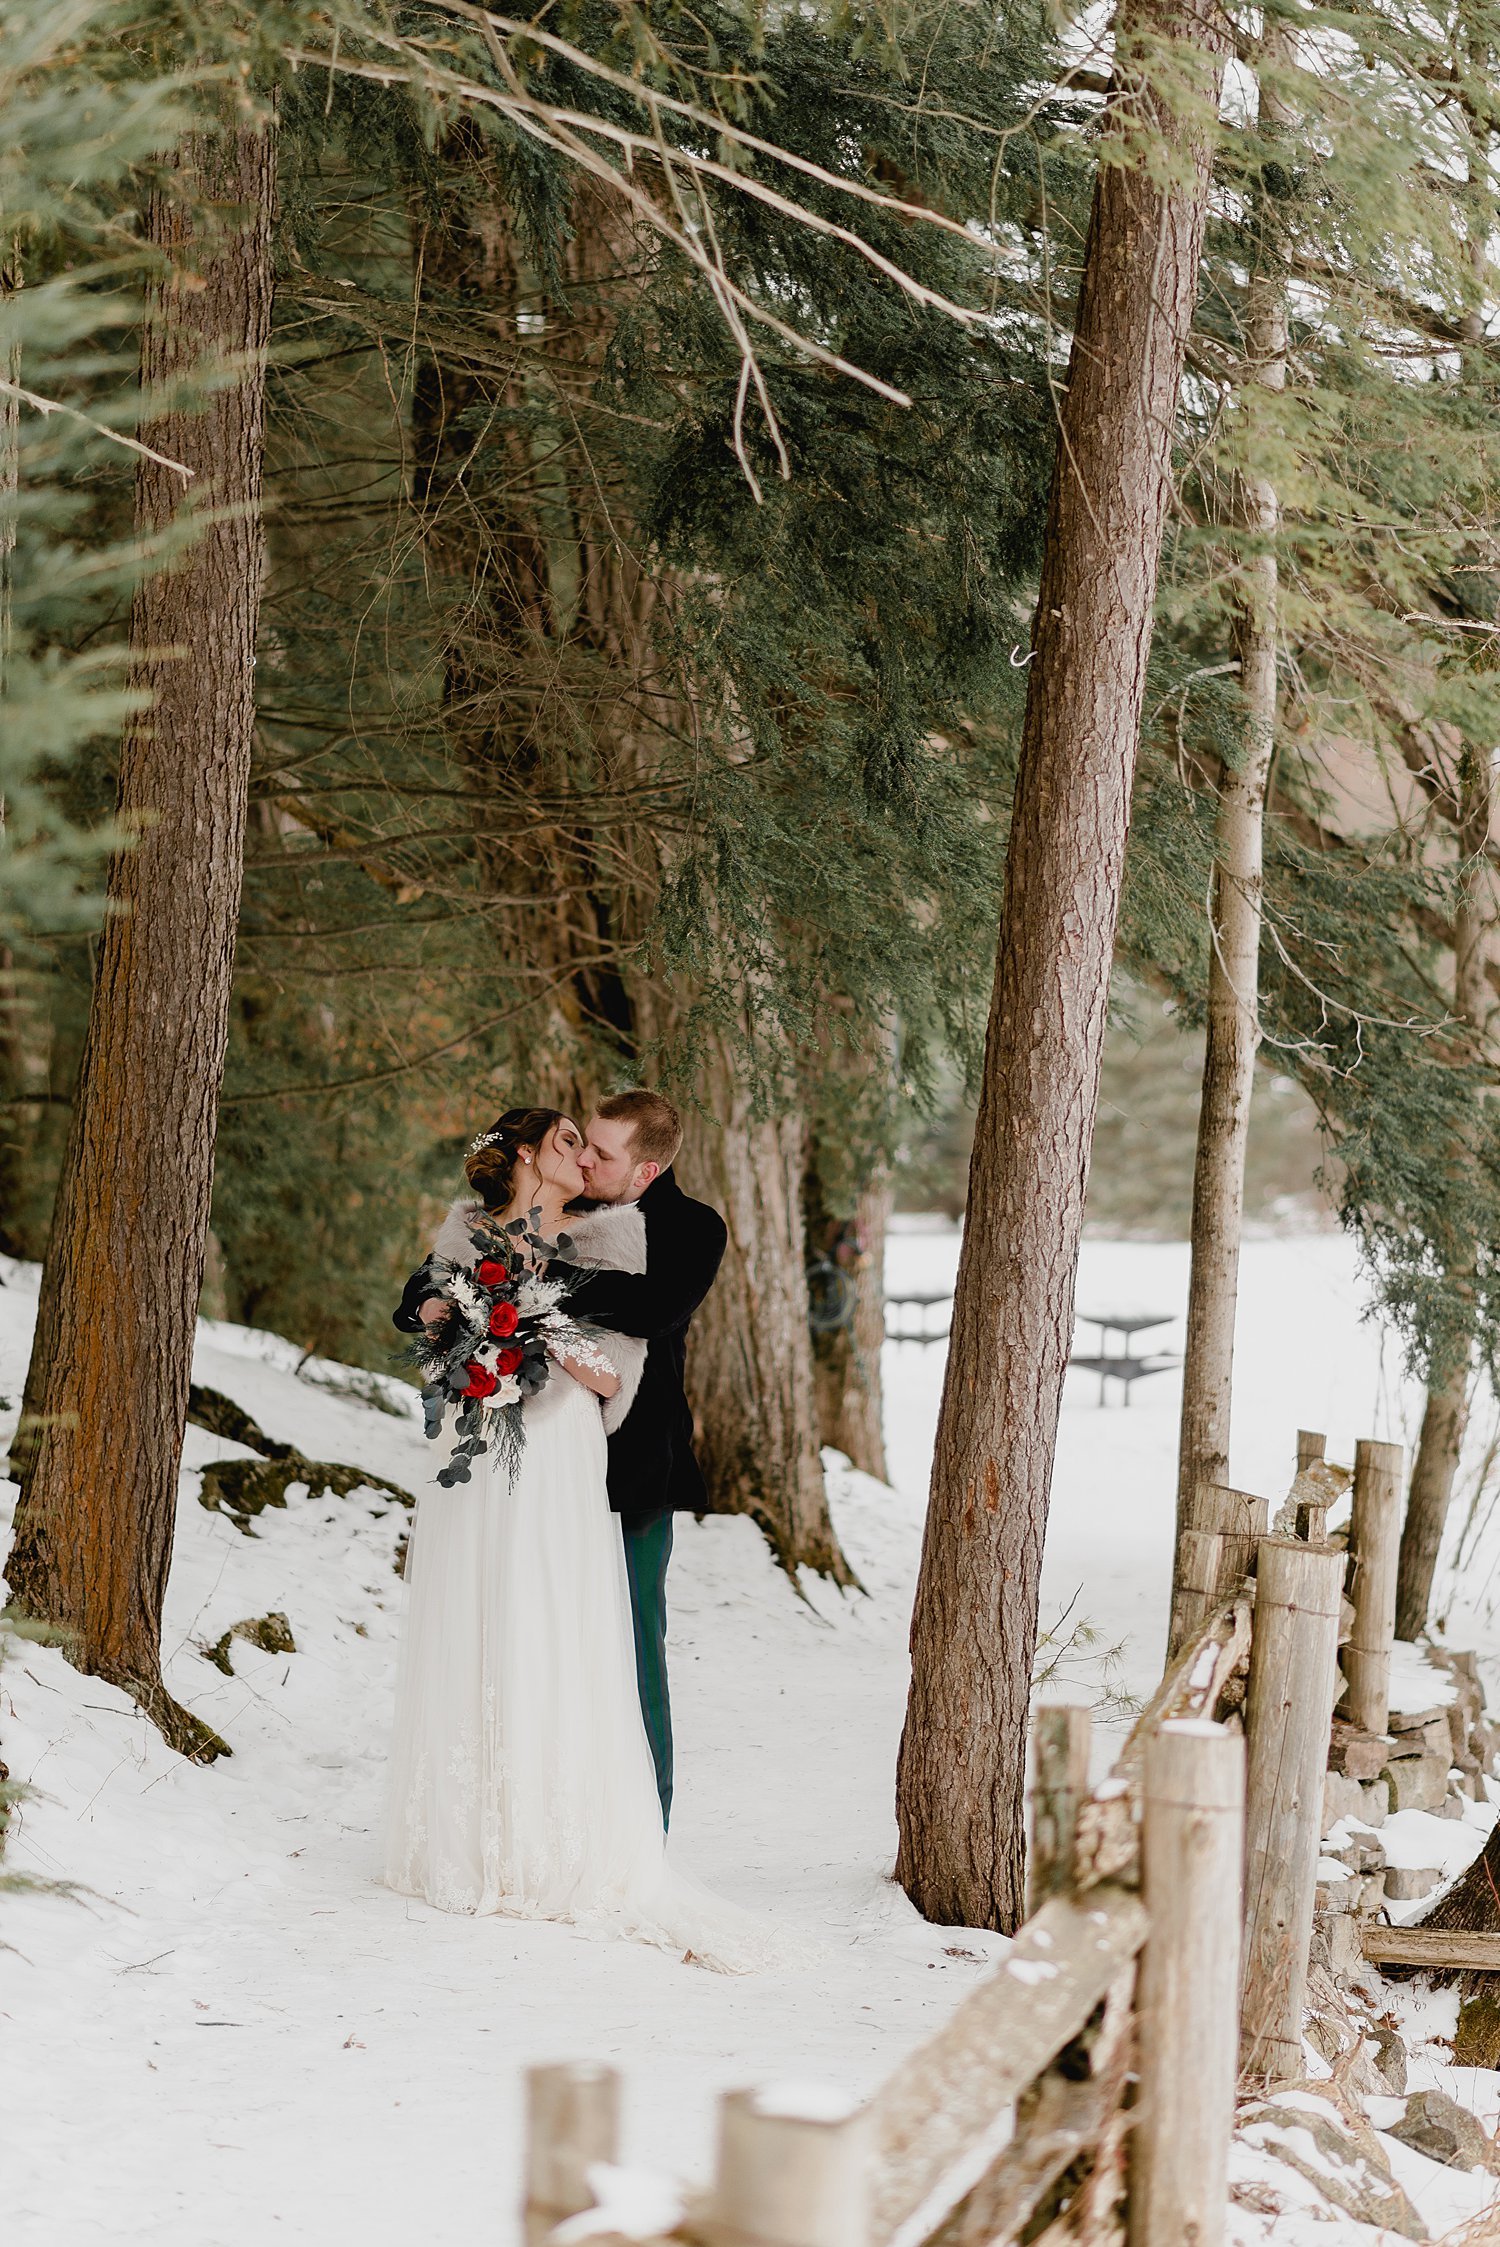 Intimate Winter Elopement at O'Hara Mill Homestead in Madoc, Ontario | Prince Edward County Wedding Photographer | Holly McMurter Photographs_0050.jpg